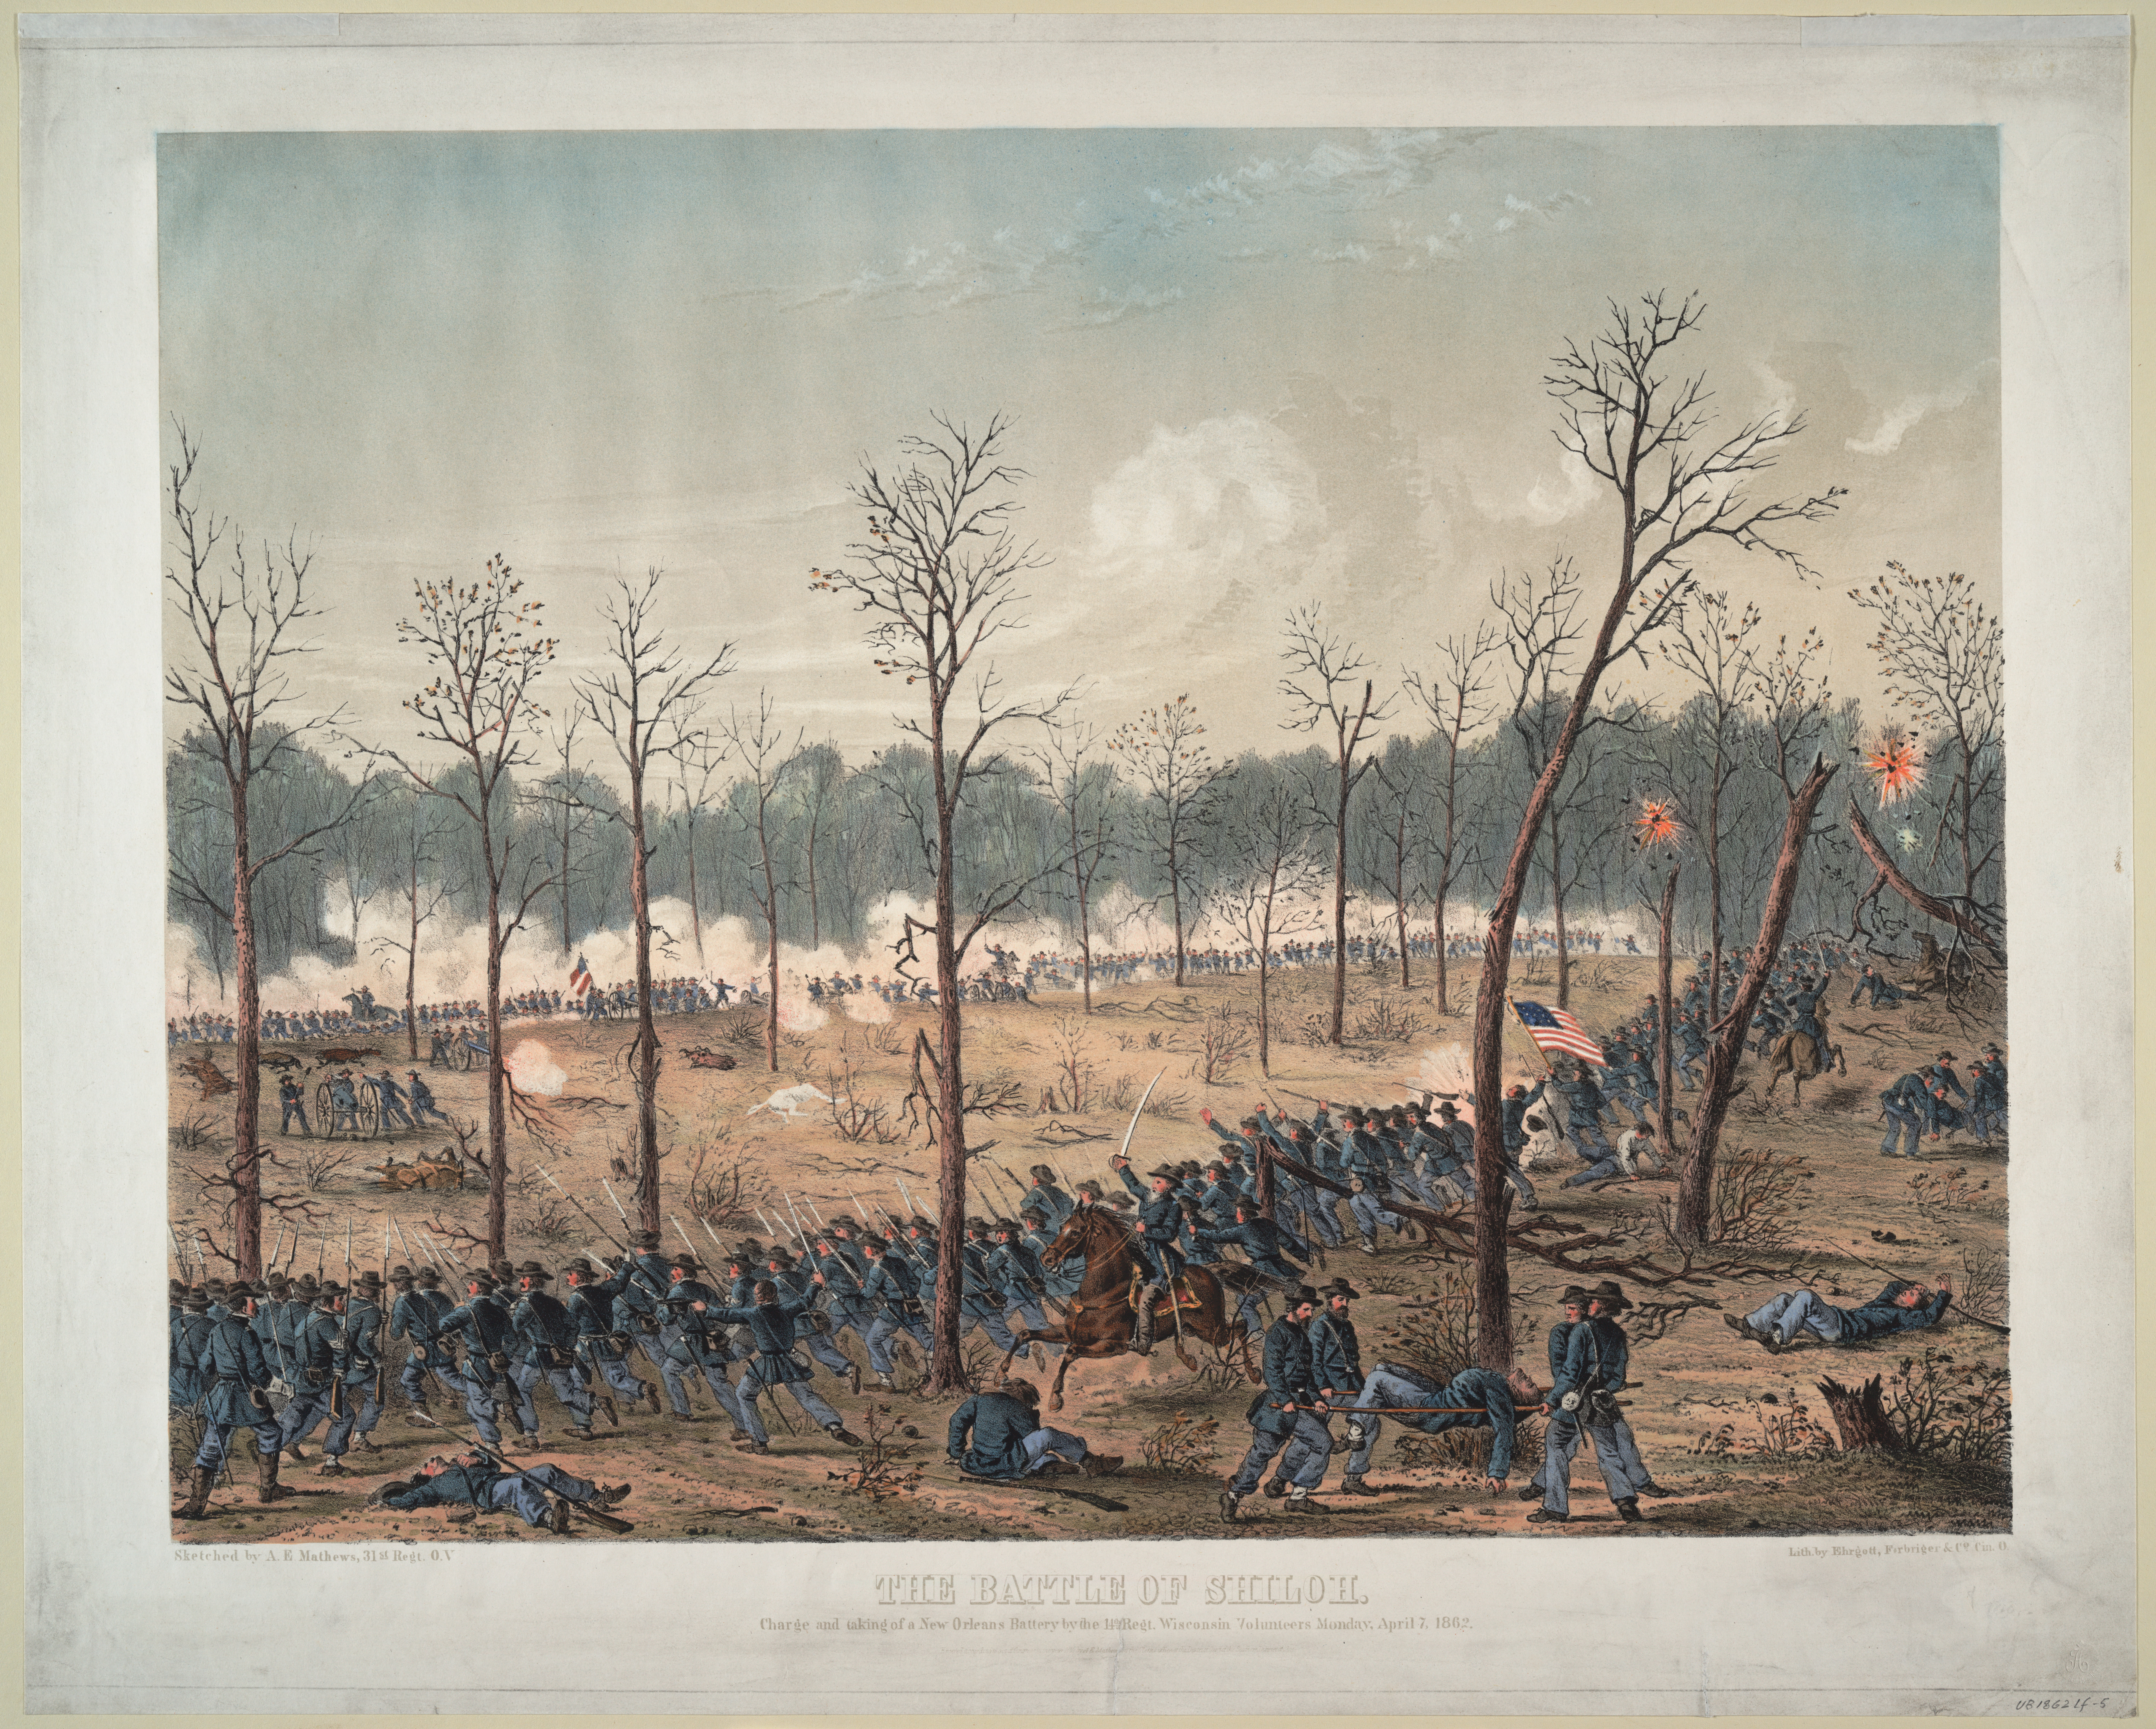 The Battle of Shiloh by Alfred Edward Mathews (Anne S.K. Brown Military Collection, Brown Digital Respository, Brown University Magazine)